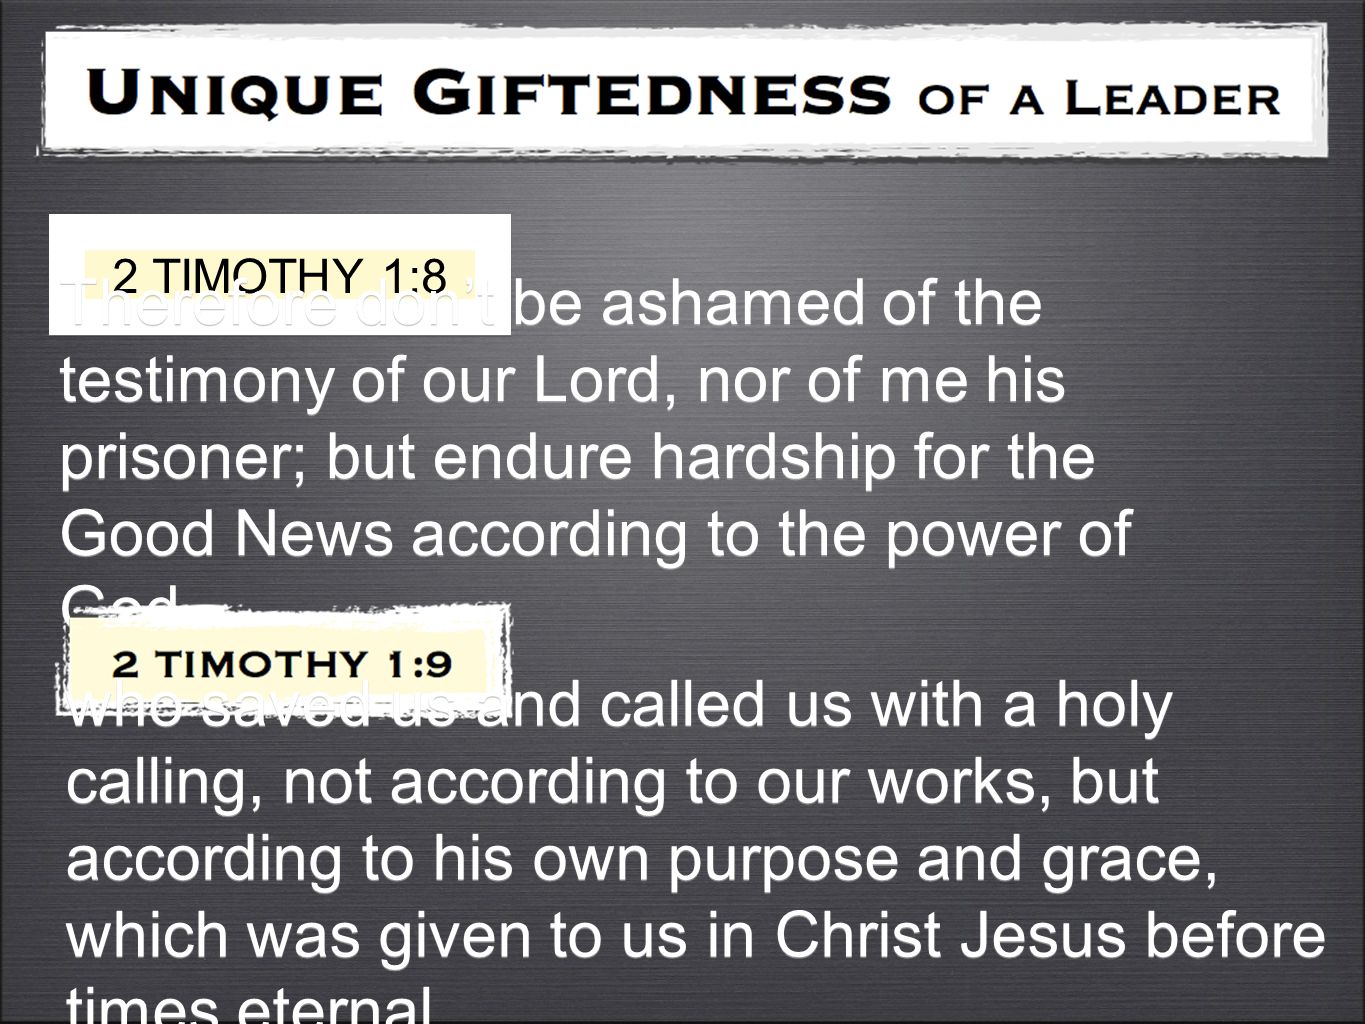 2 TIMOTHY 1:8 Therefore don’t be ashamed of the testimony of our Lord, nor of me his prisoner; but endure hardship for the Good News according to the power of God who saved us and called us with a holy calling, not according to our works, but according to his own purpose and grace, which was given to us in Christ Jesus before times eternal,